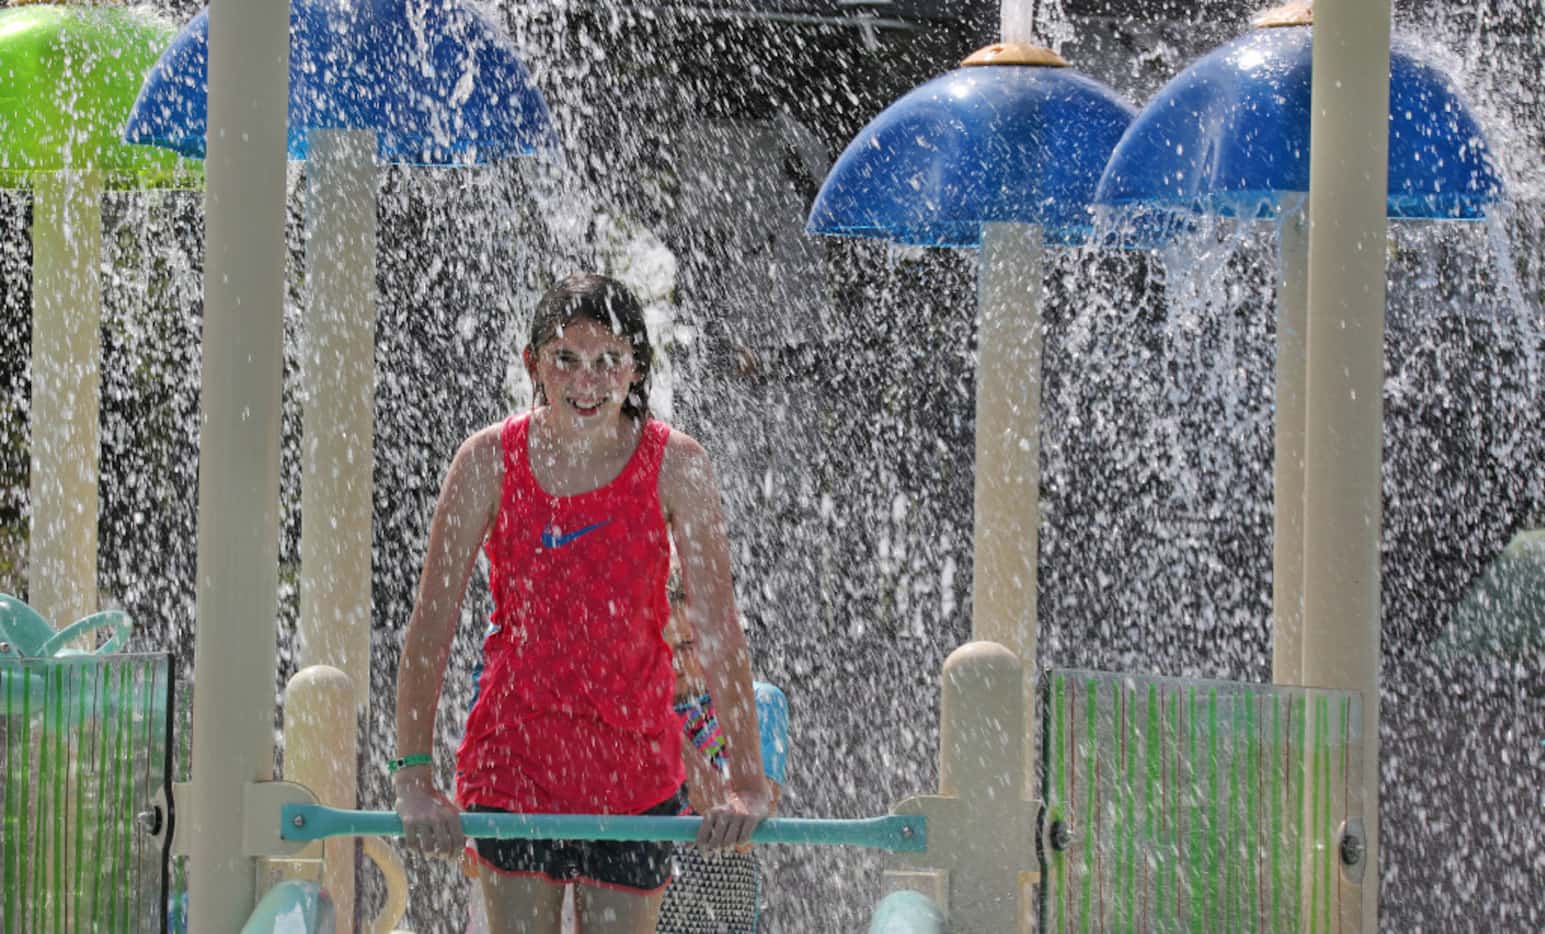 Young swimmers enjoy a shower of water on one of the many play areas at JadeWaters, the...